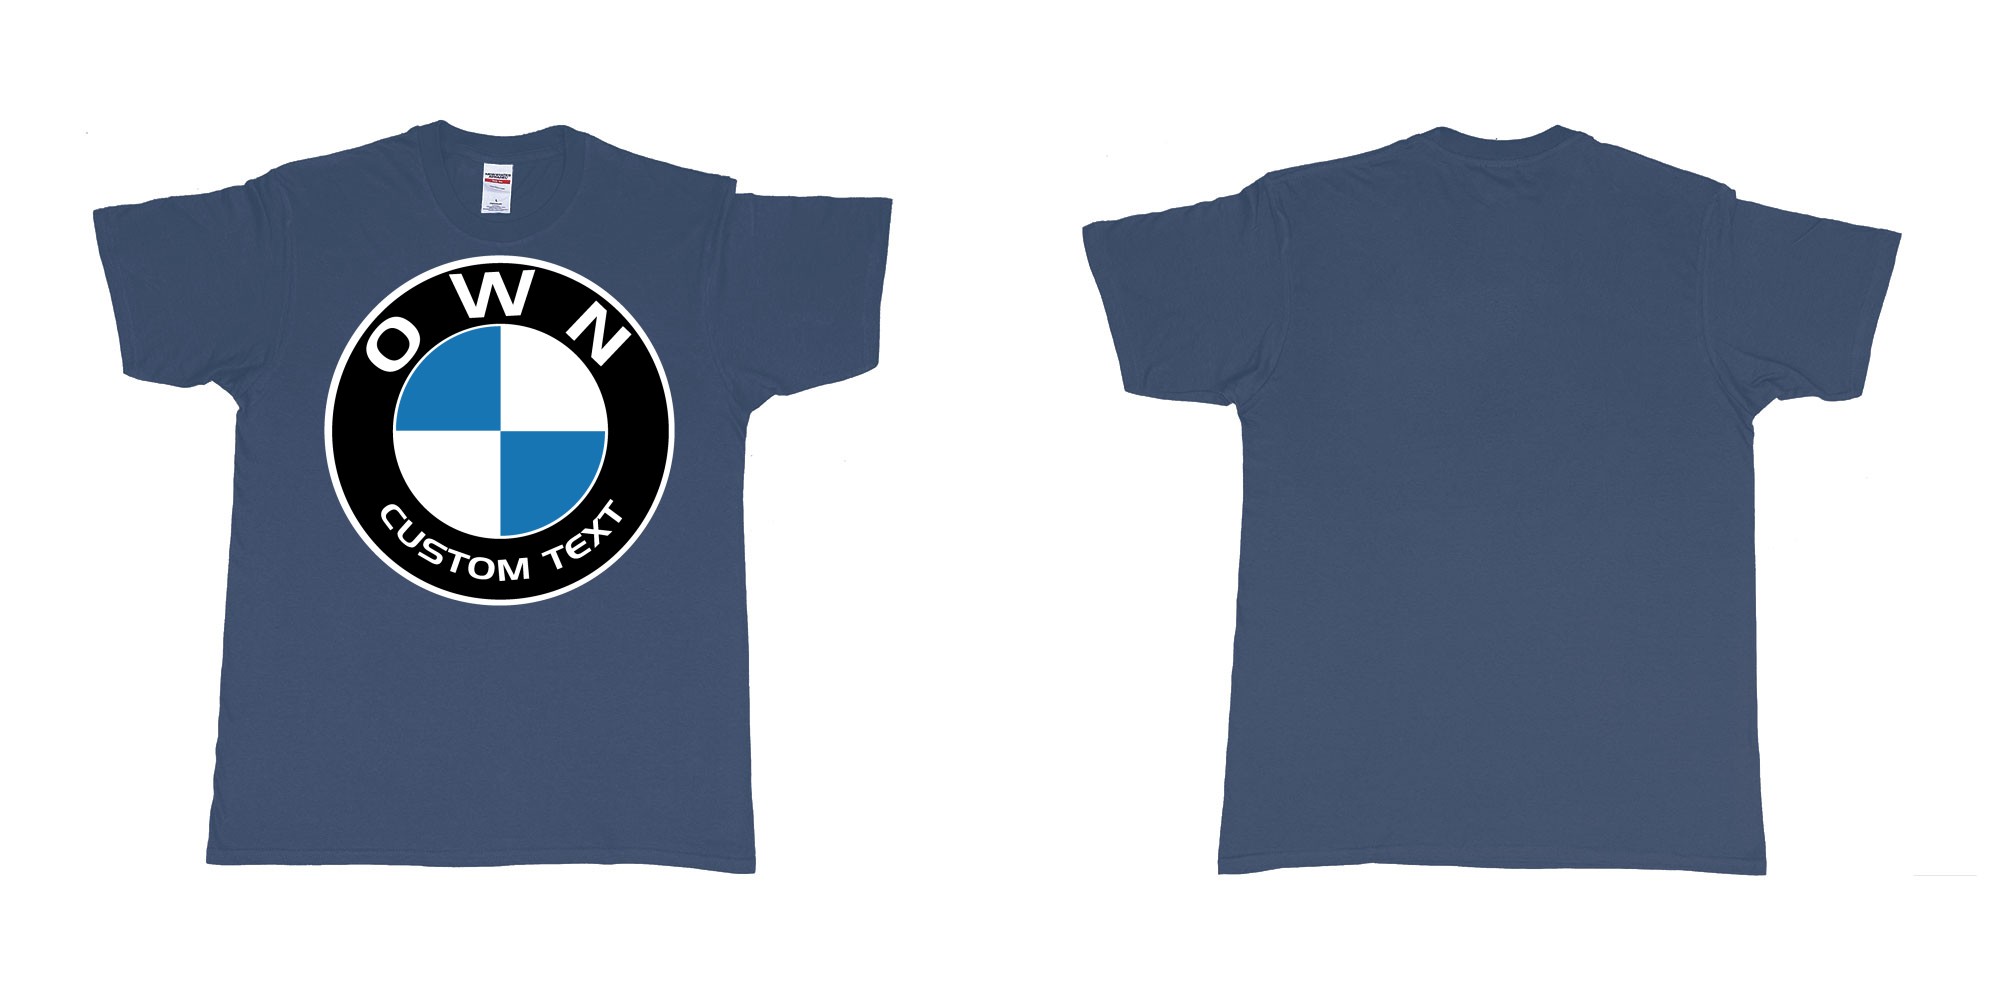 Custom tshirt design BMW logo custom text tshirt printing in fabric color navy choice your own text made in Bali by The Pirate Way